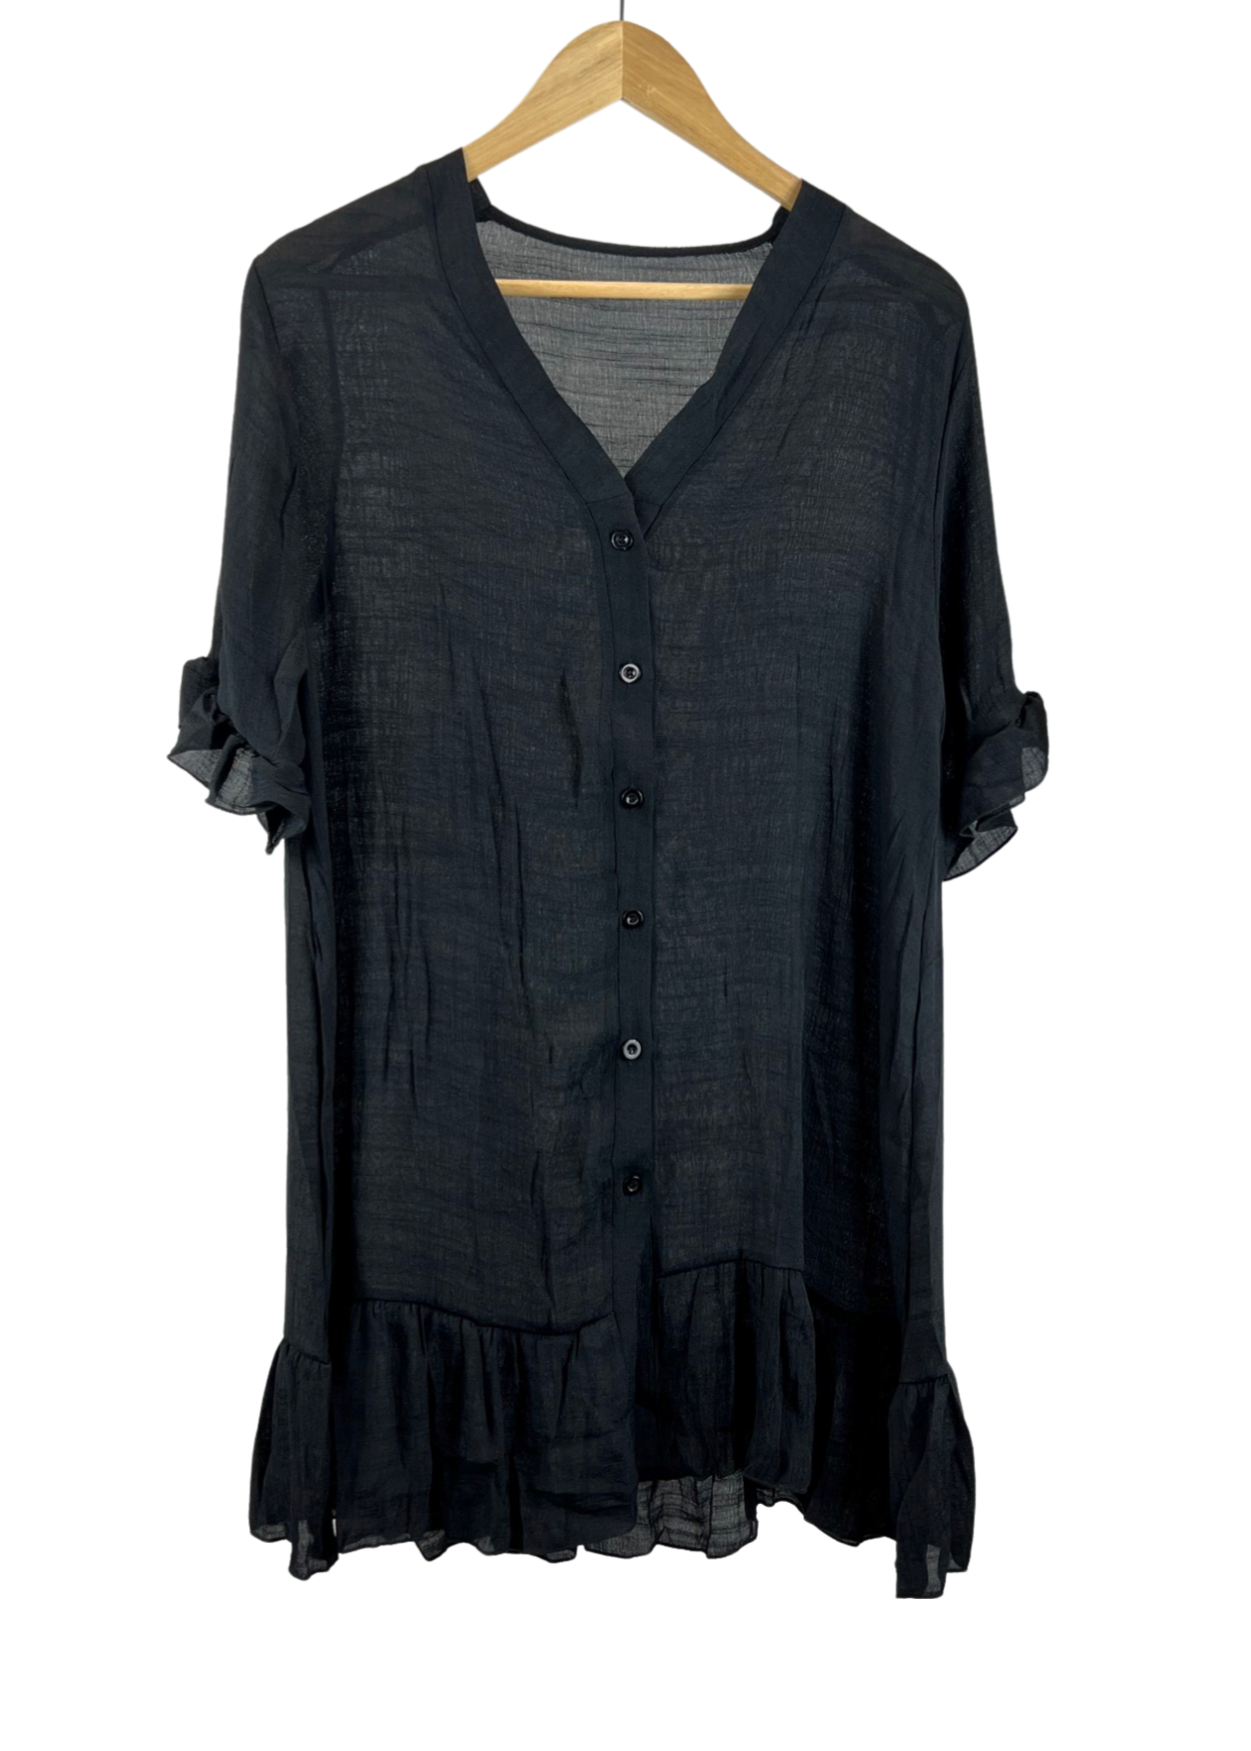 Sheer Button Up Dress Cover Up